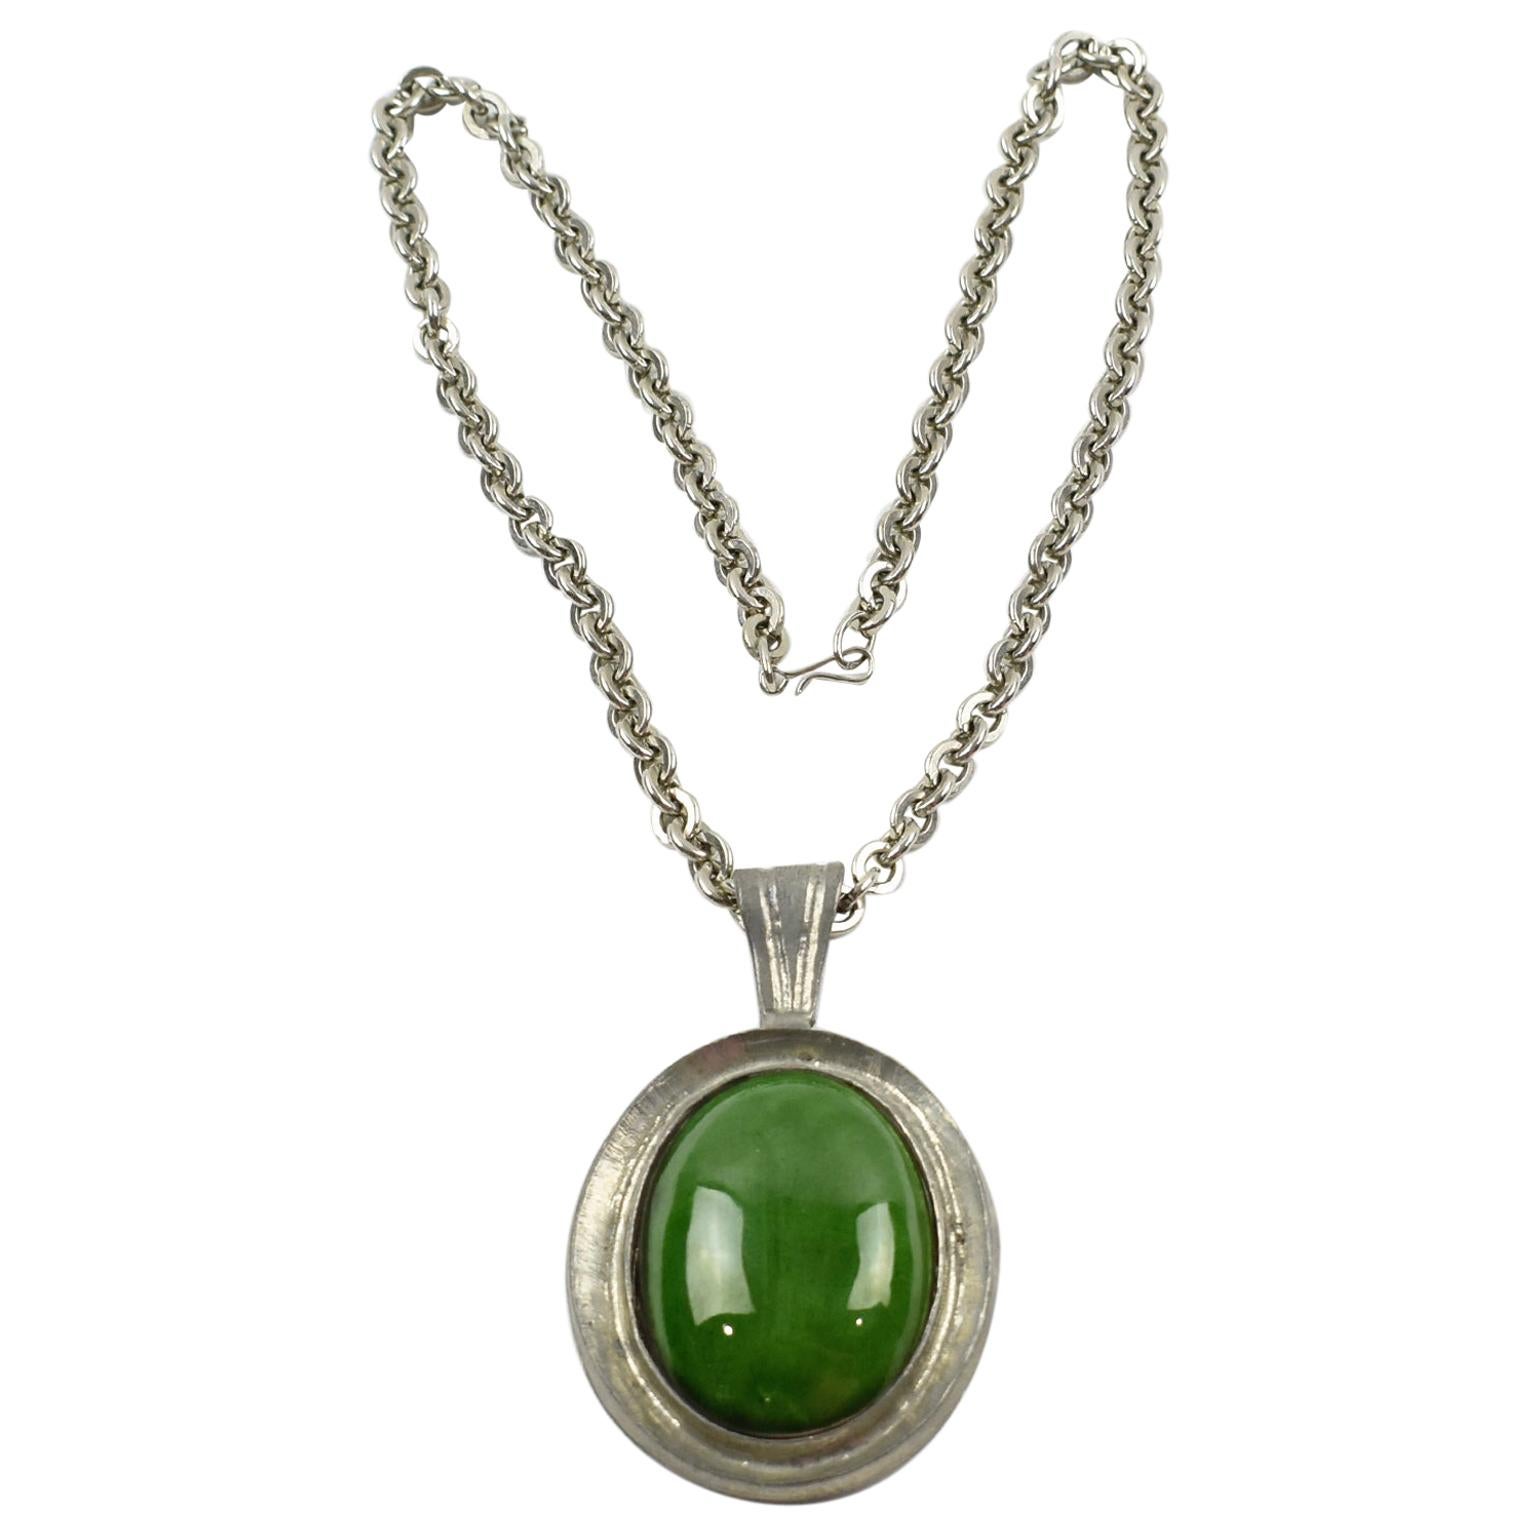 Space Age Pewter Necklace with Green Ceramic Pendant For Sale